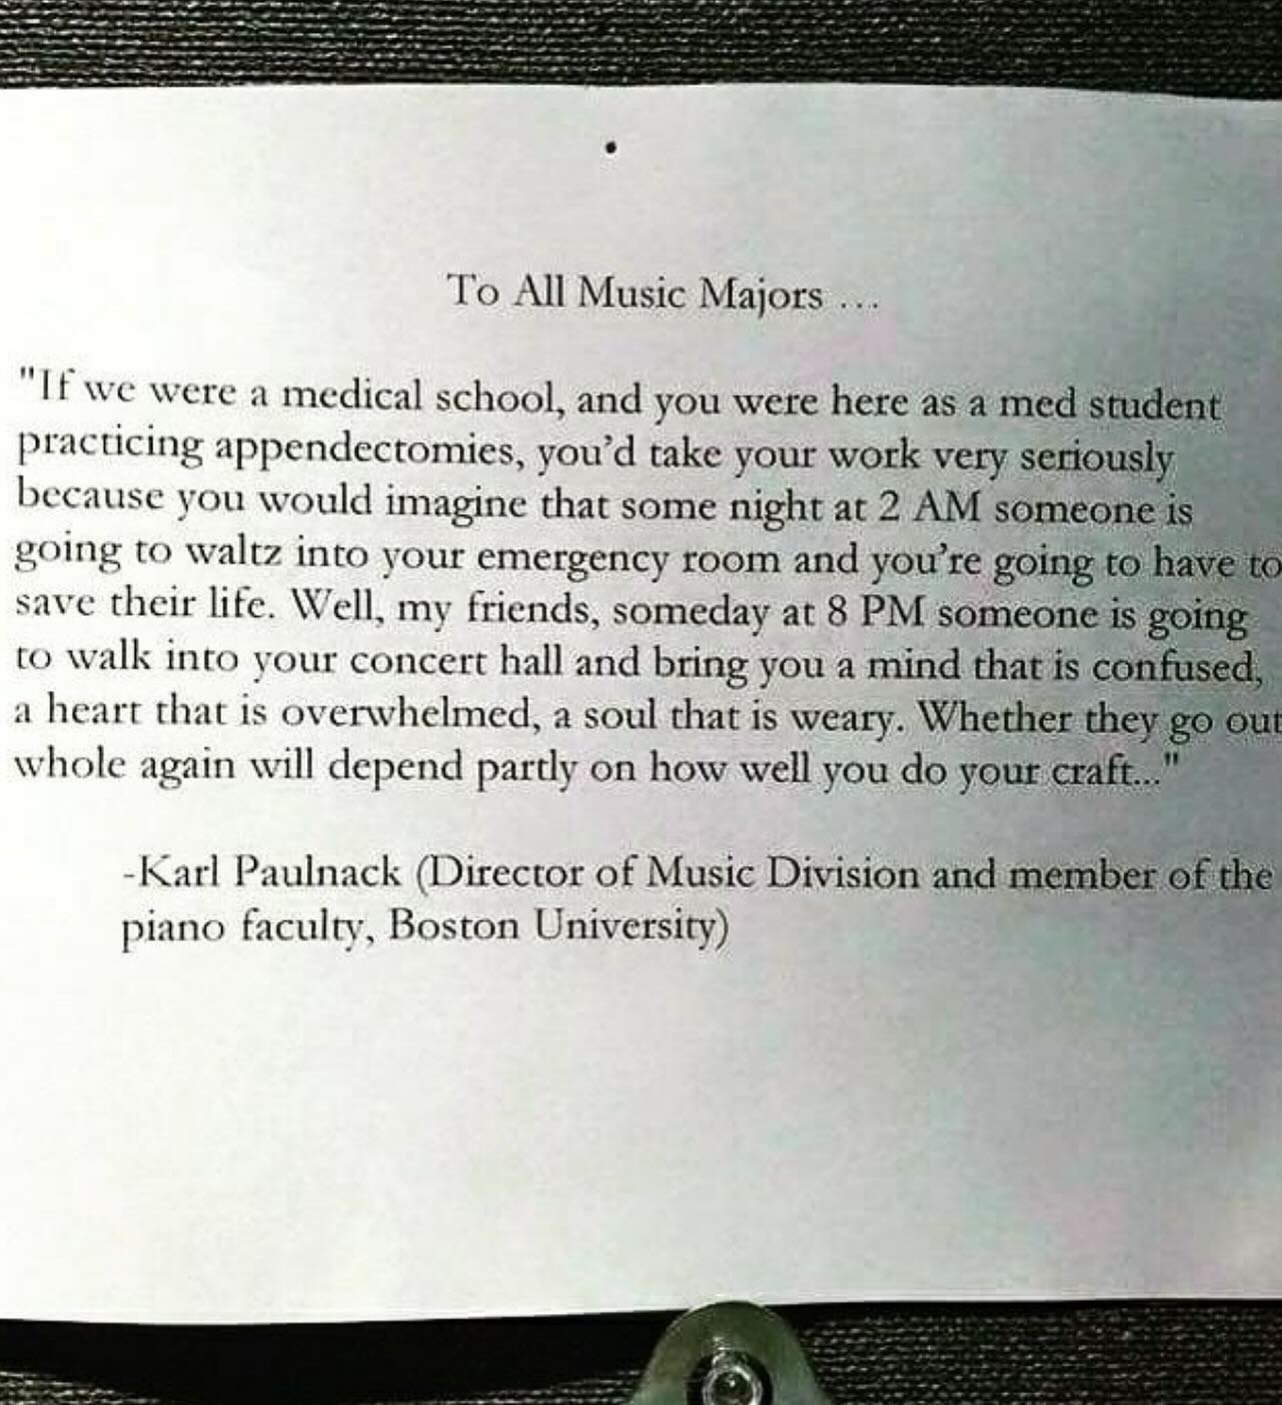 This is not meant to pressure musicians, but rather applaud their significance in the world, one of the truest truths there ever was. ❤️❤️❤️